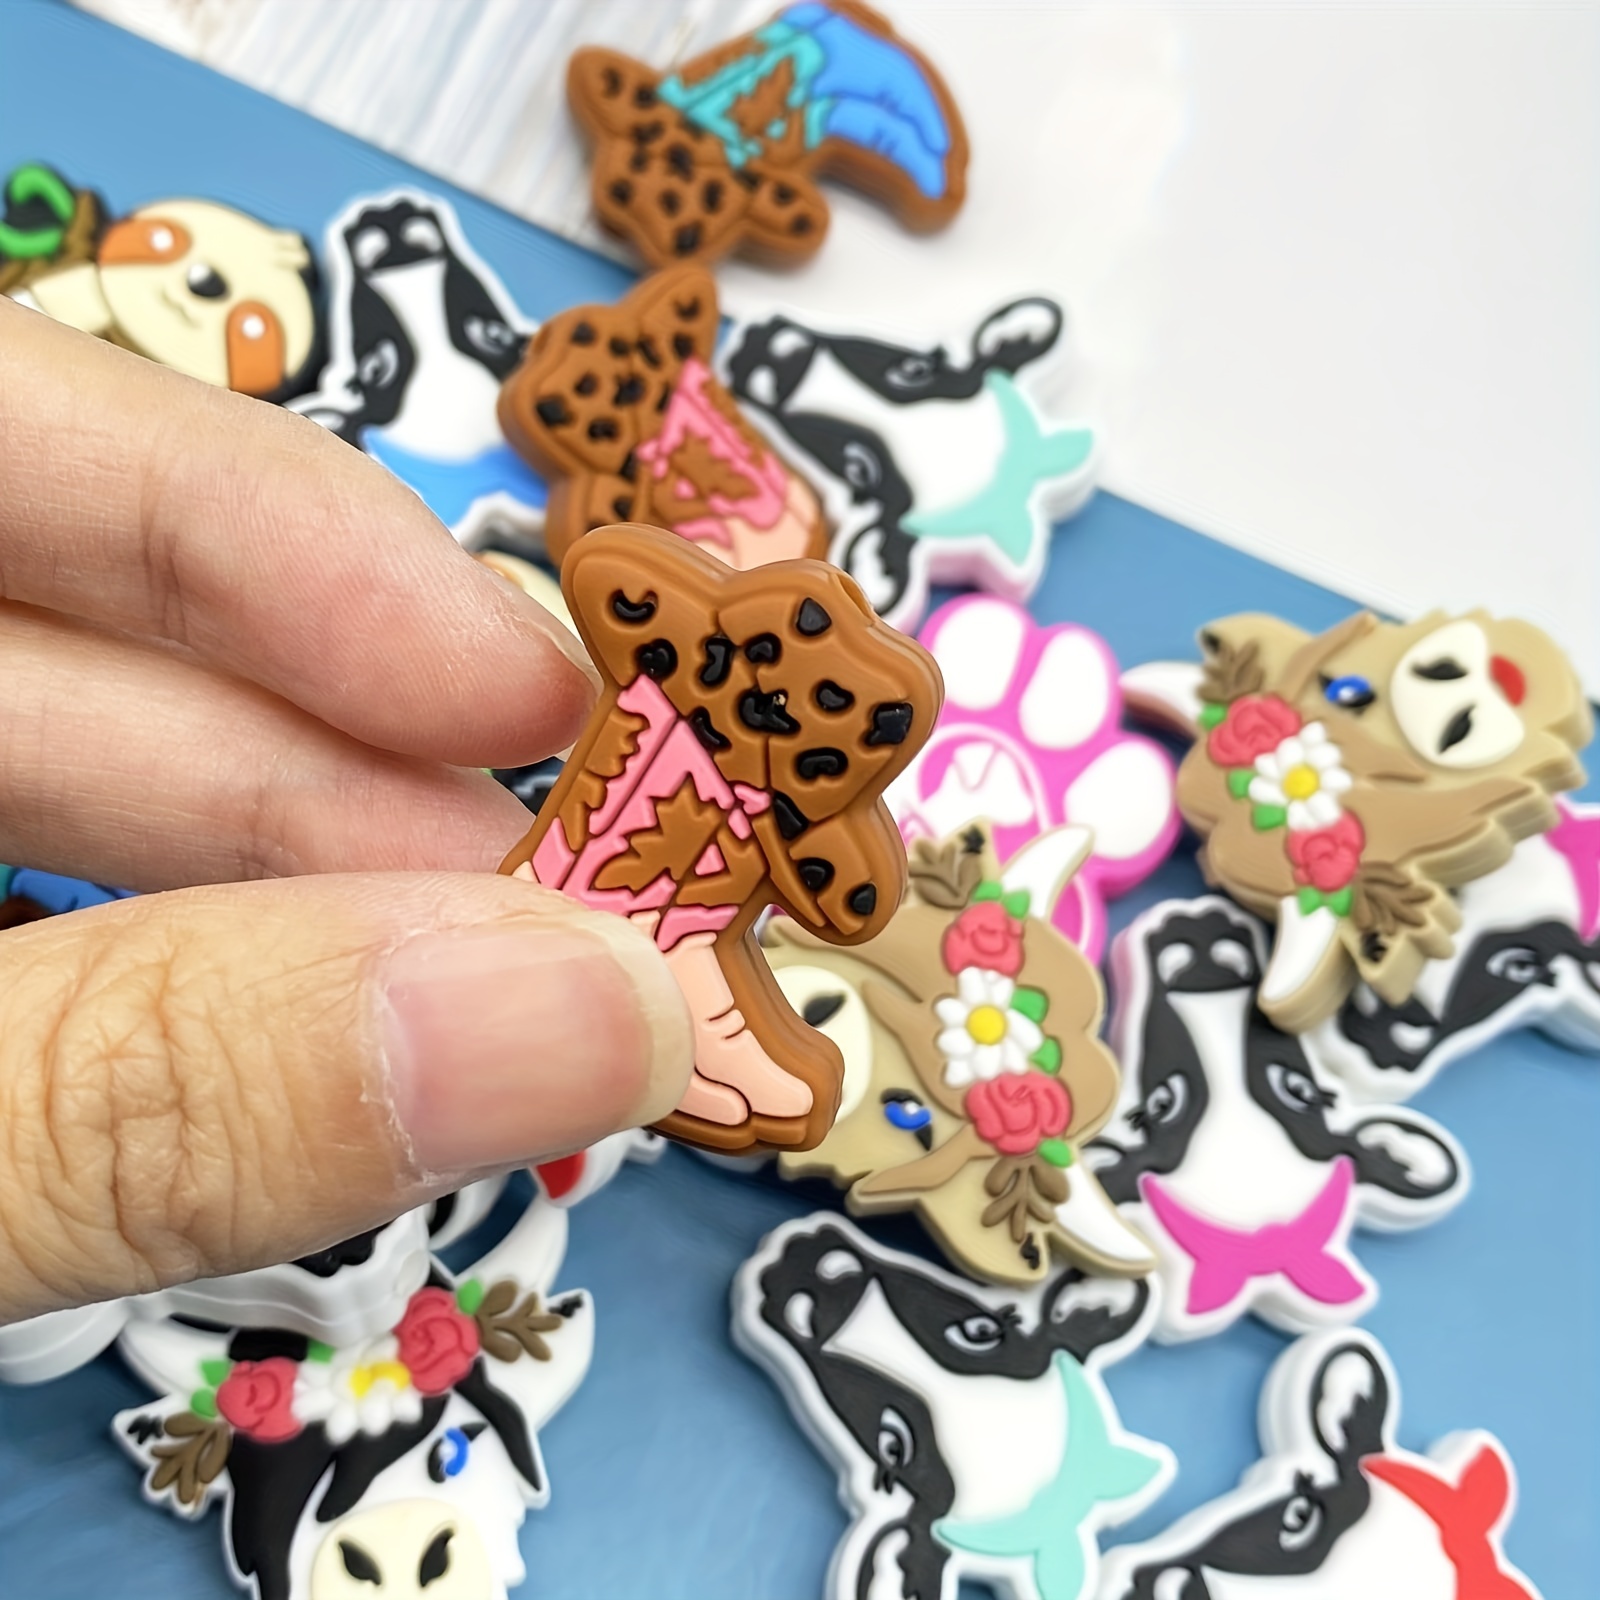 KitBeads 50pcs Enamel Cattle Cow Charms Flower Cattle Charms Alloy Cow Animal Head Charms for Jewelry Making Bracelet